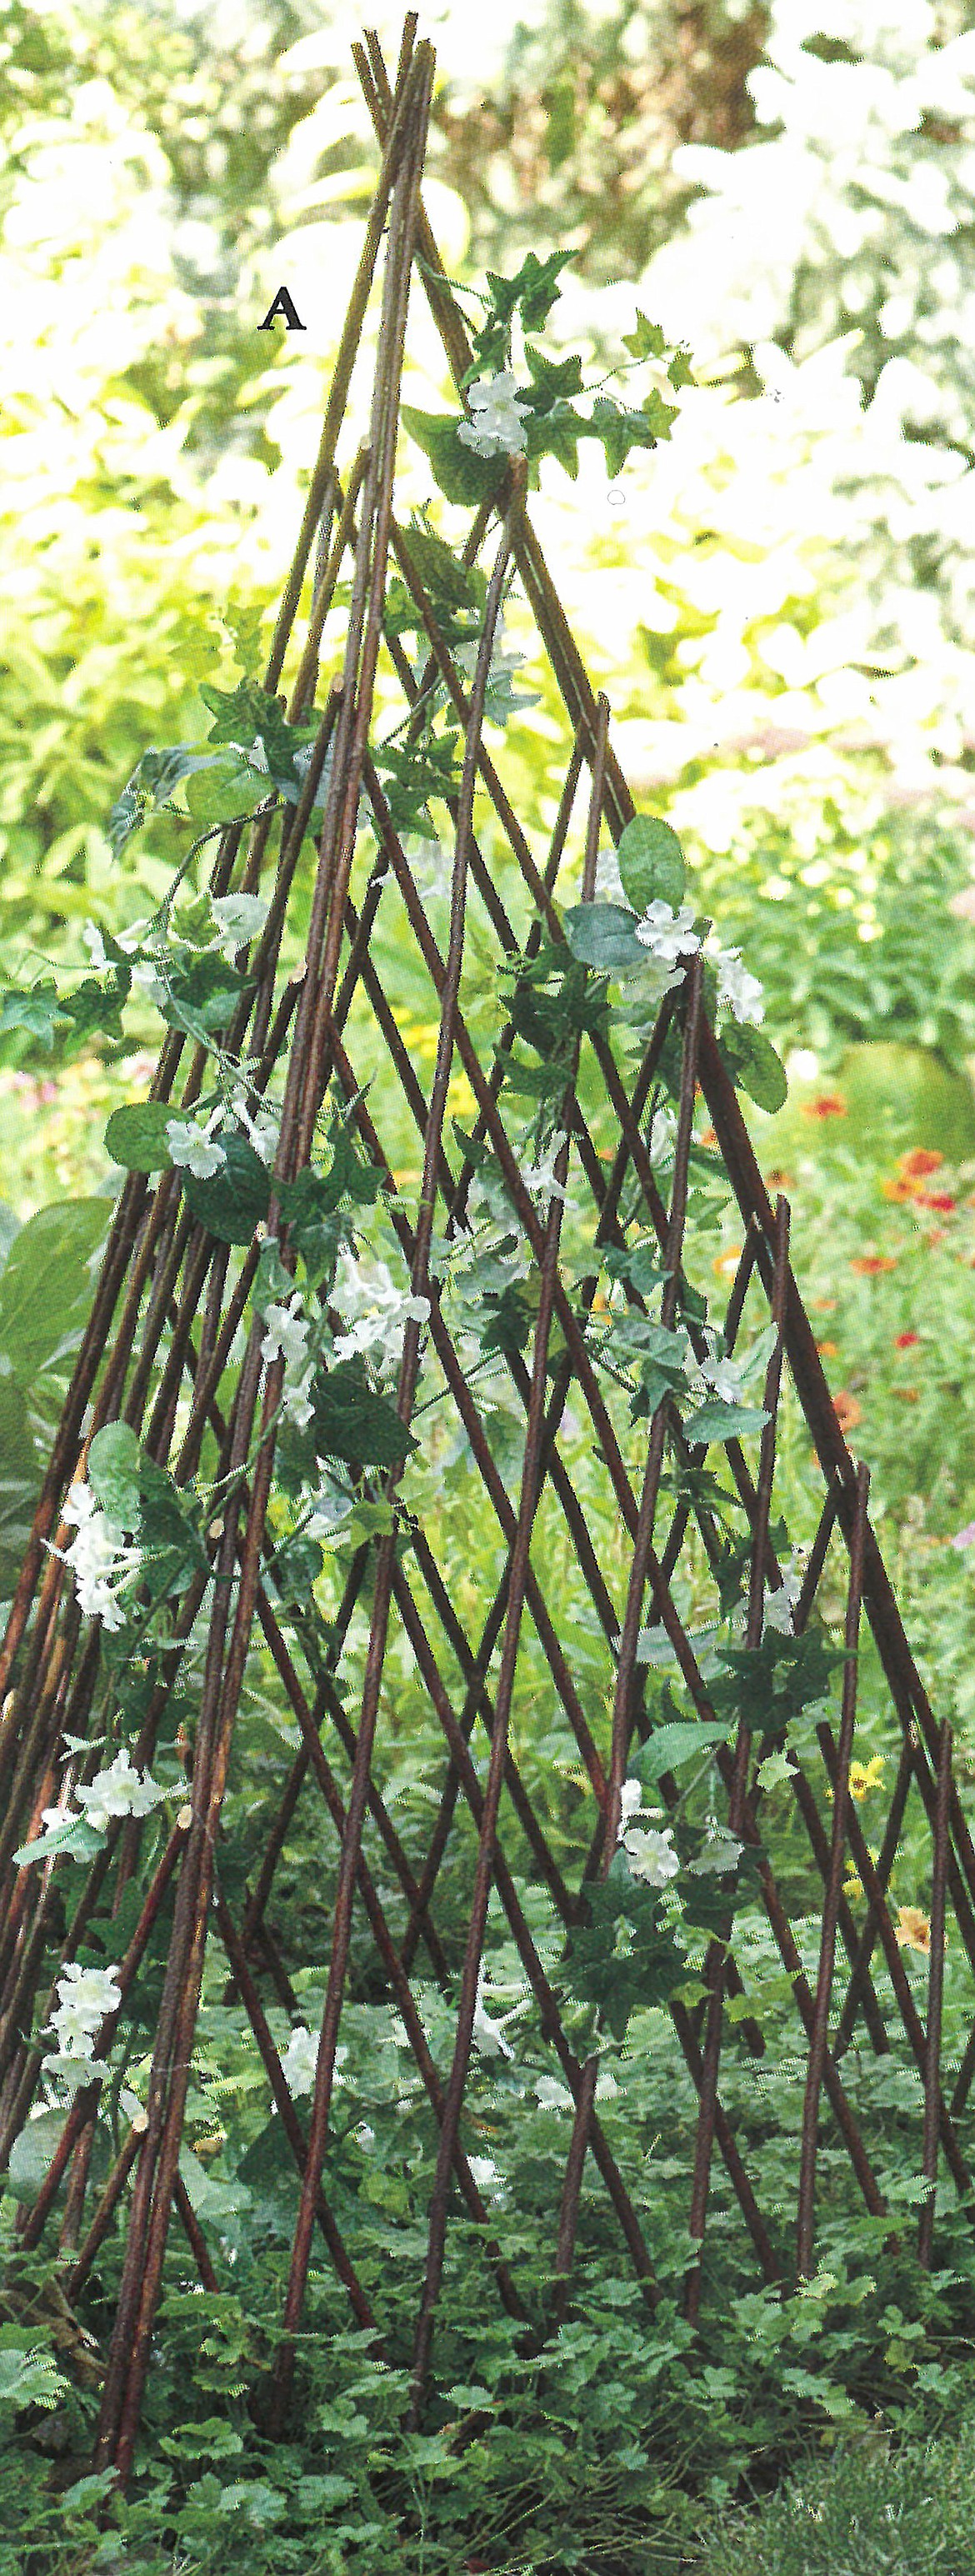 Teepee-style plant protector also serves as support for climbers.